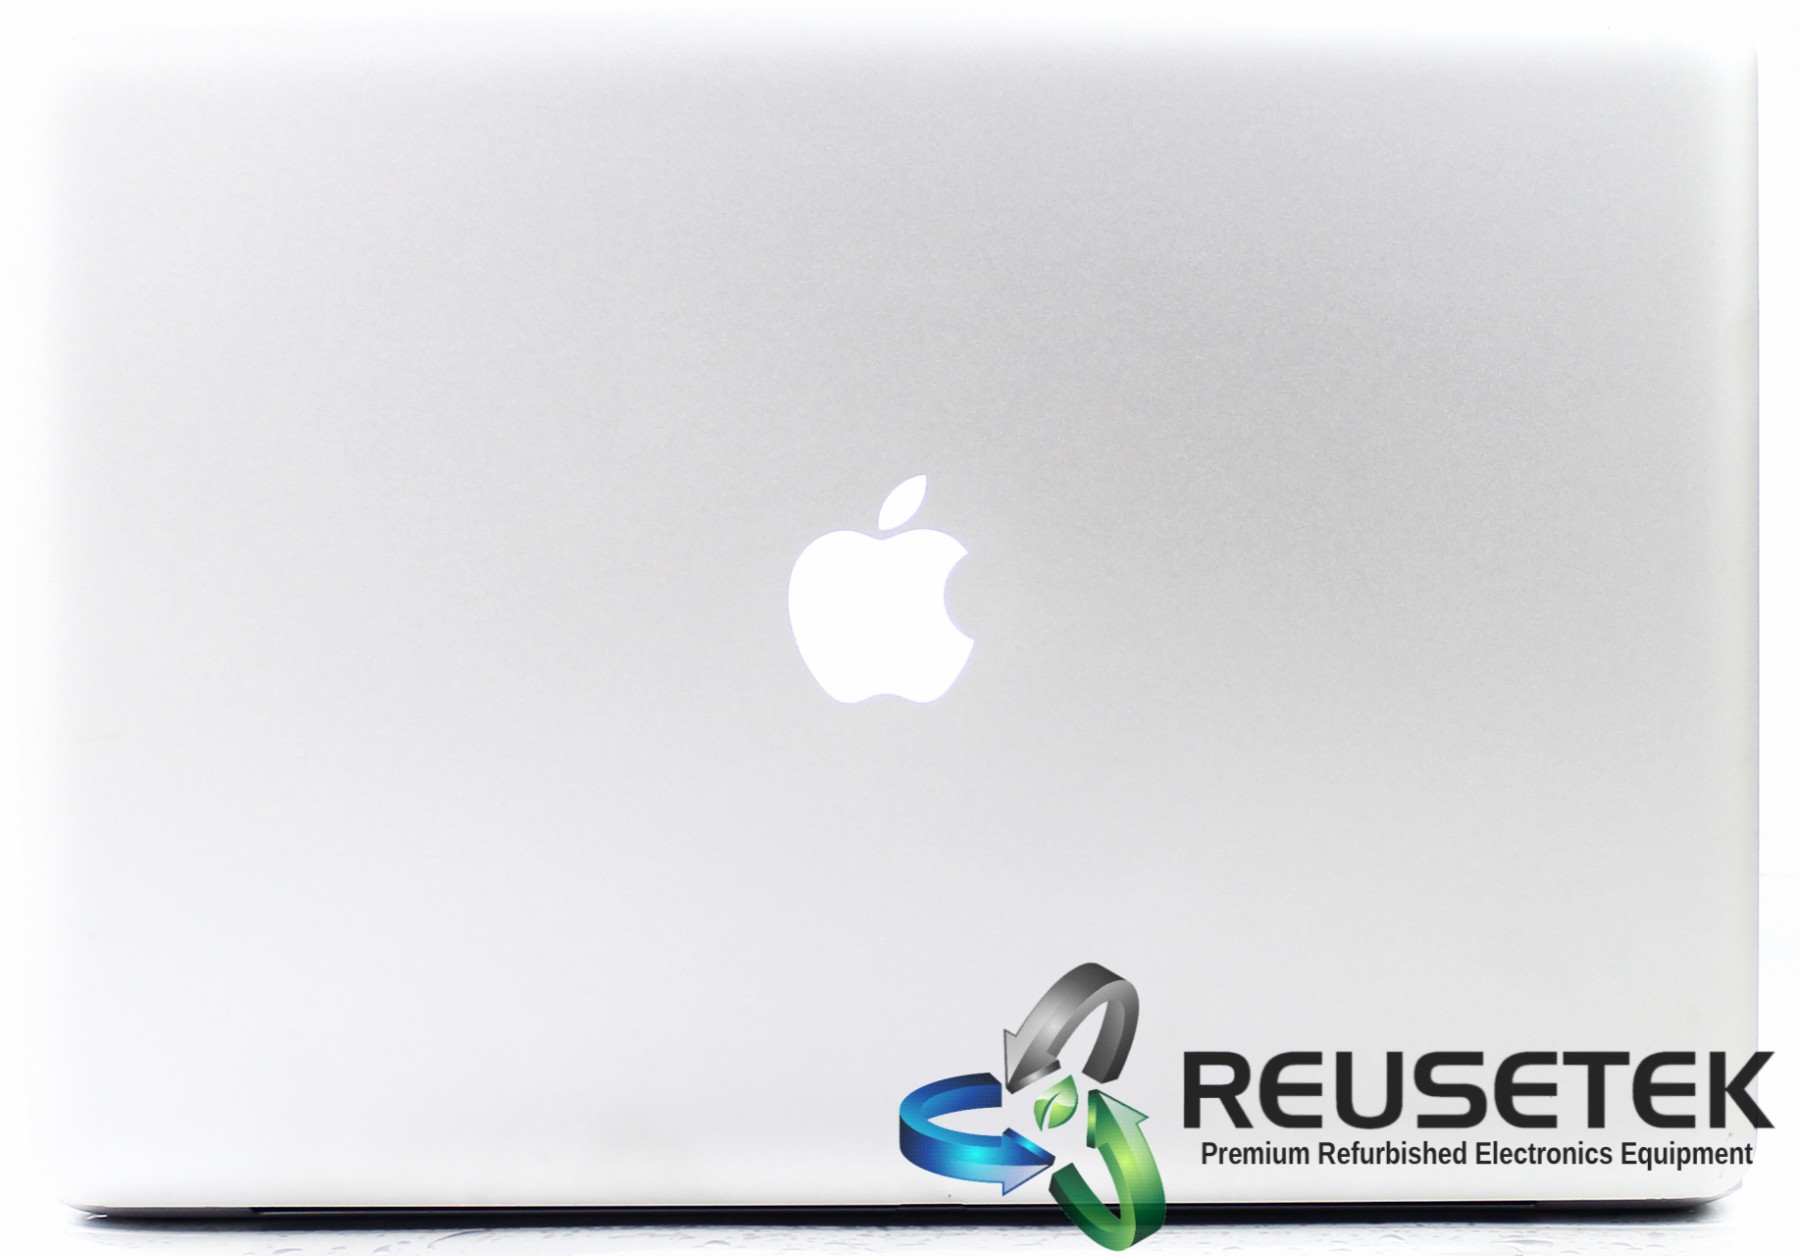 100567-SNT1138952-Apple Macbook Pro A1286 (MD318LL/A) 2.0GHz Core i7 15" Notebook Laptop-image